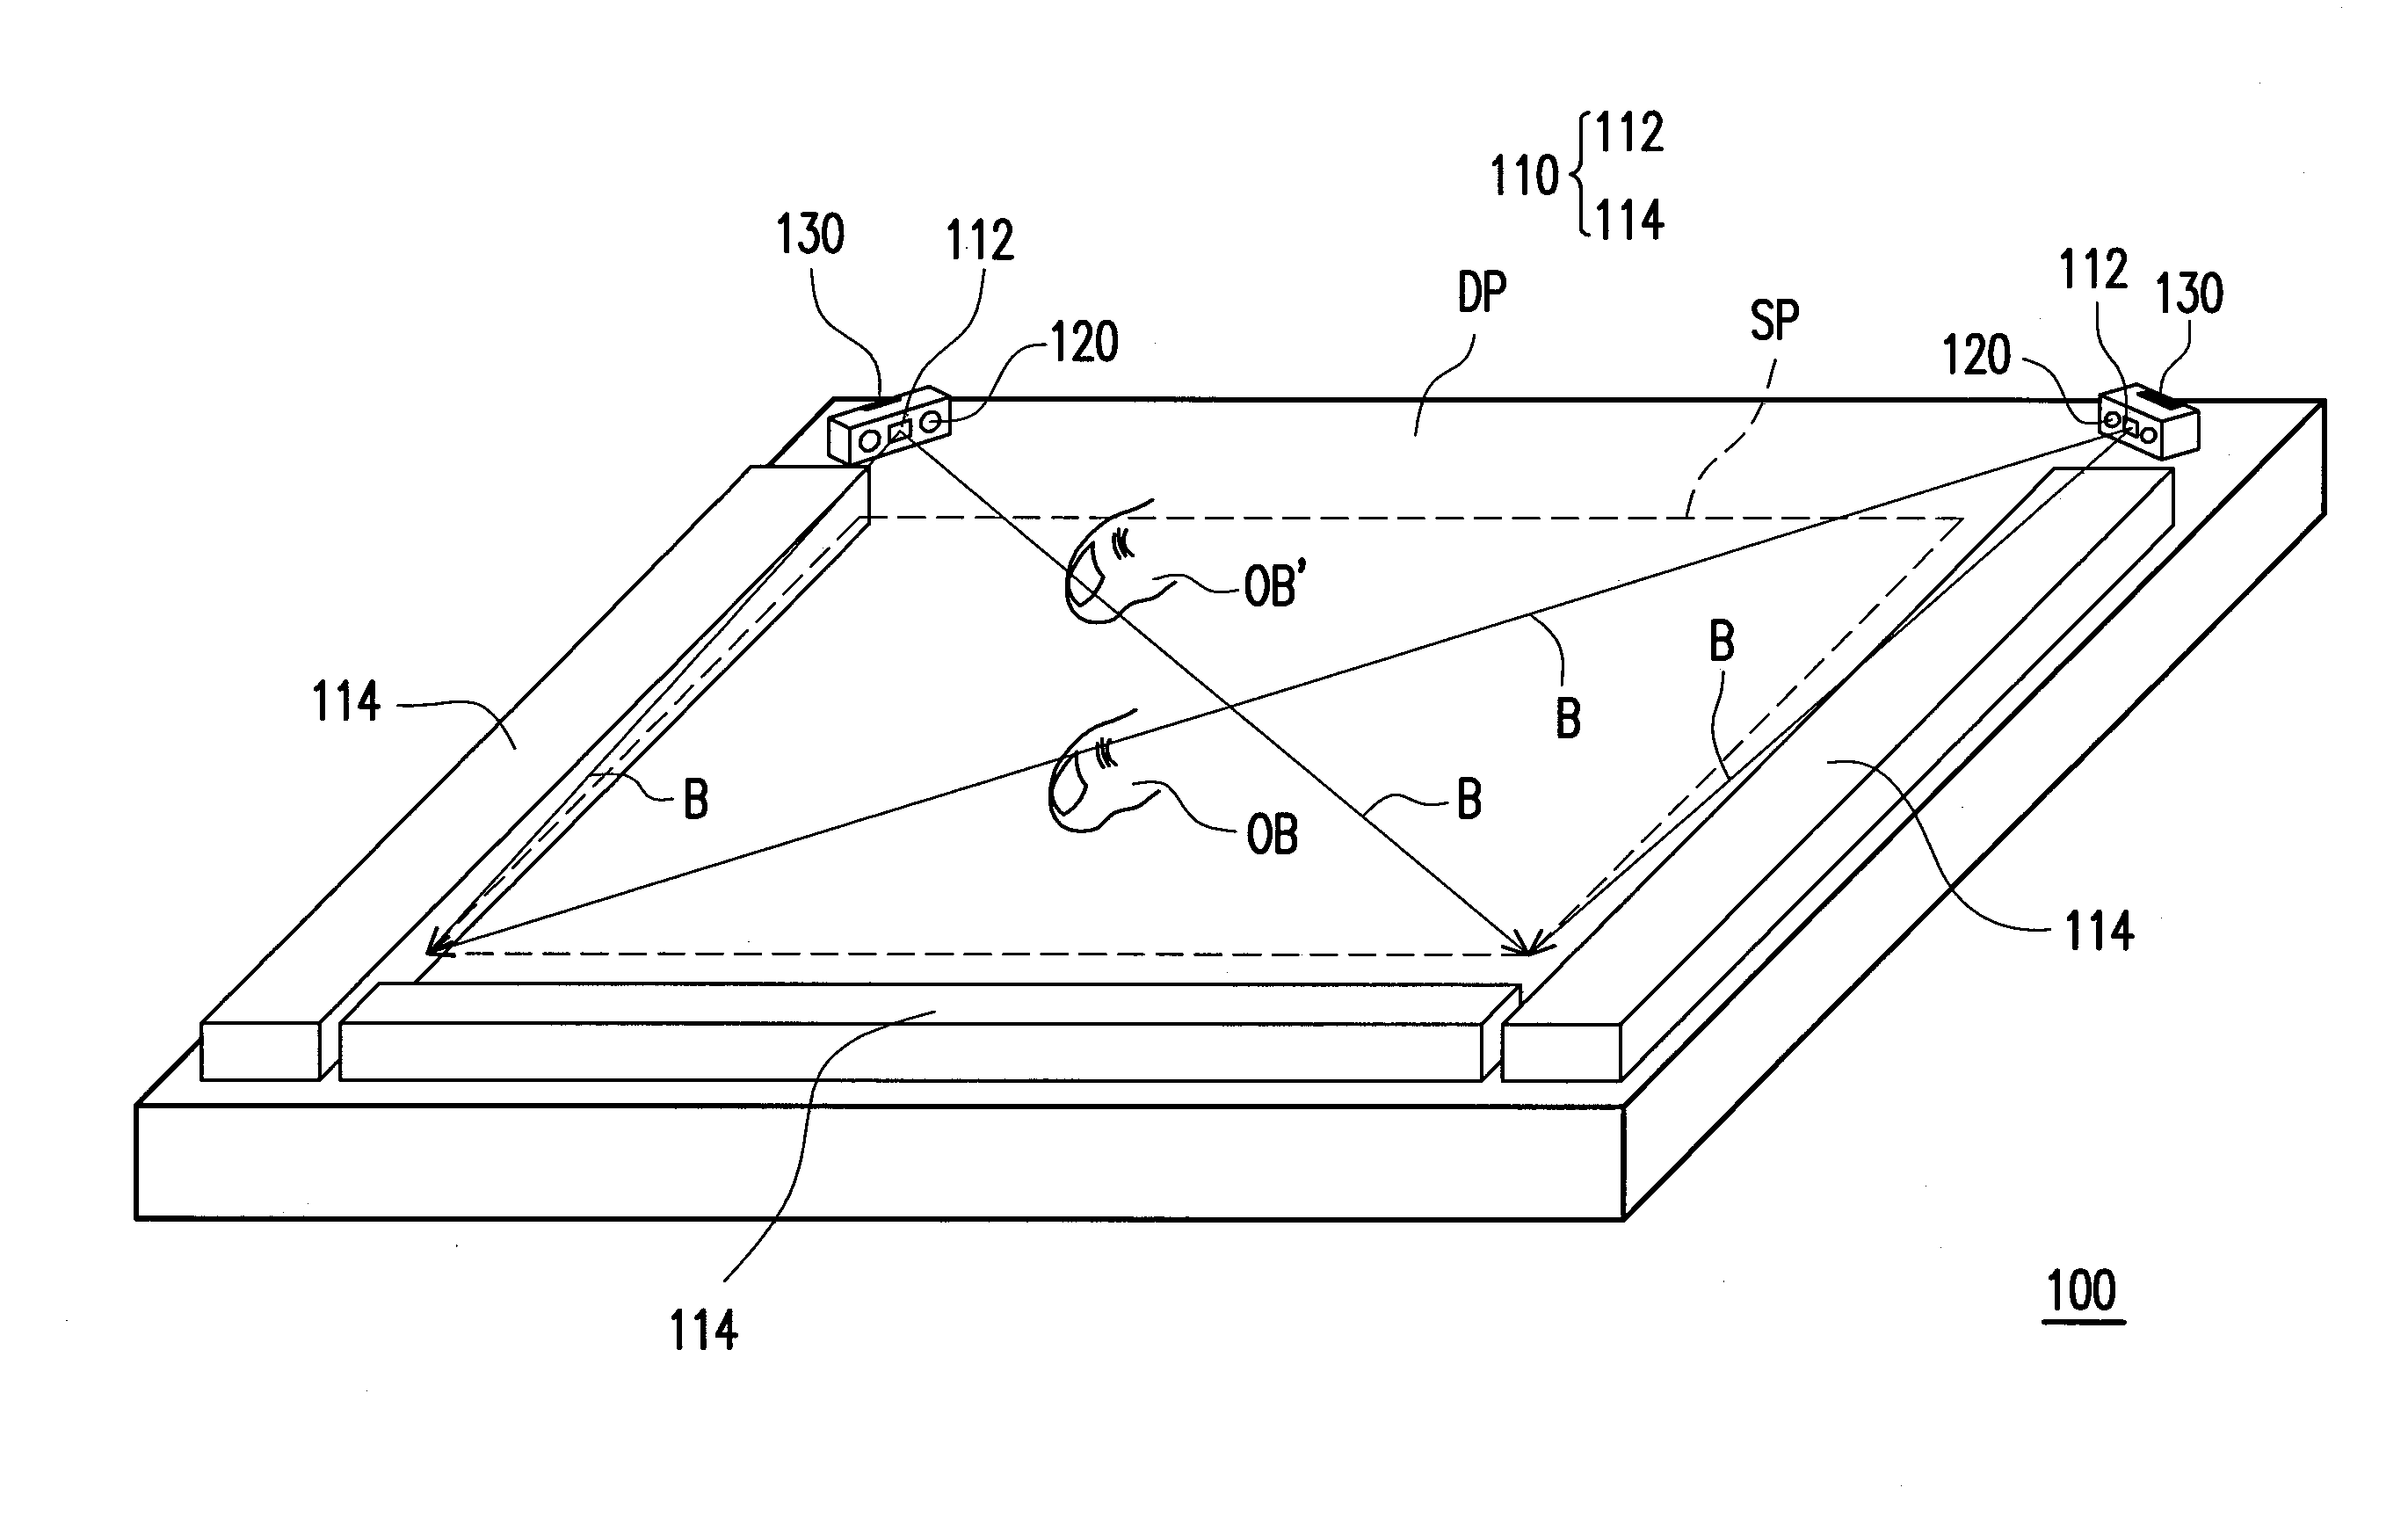 Optical touch system, method of touch detection and computer program product